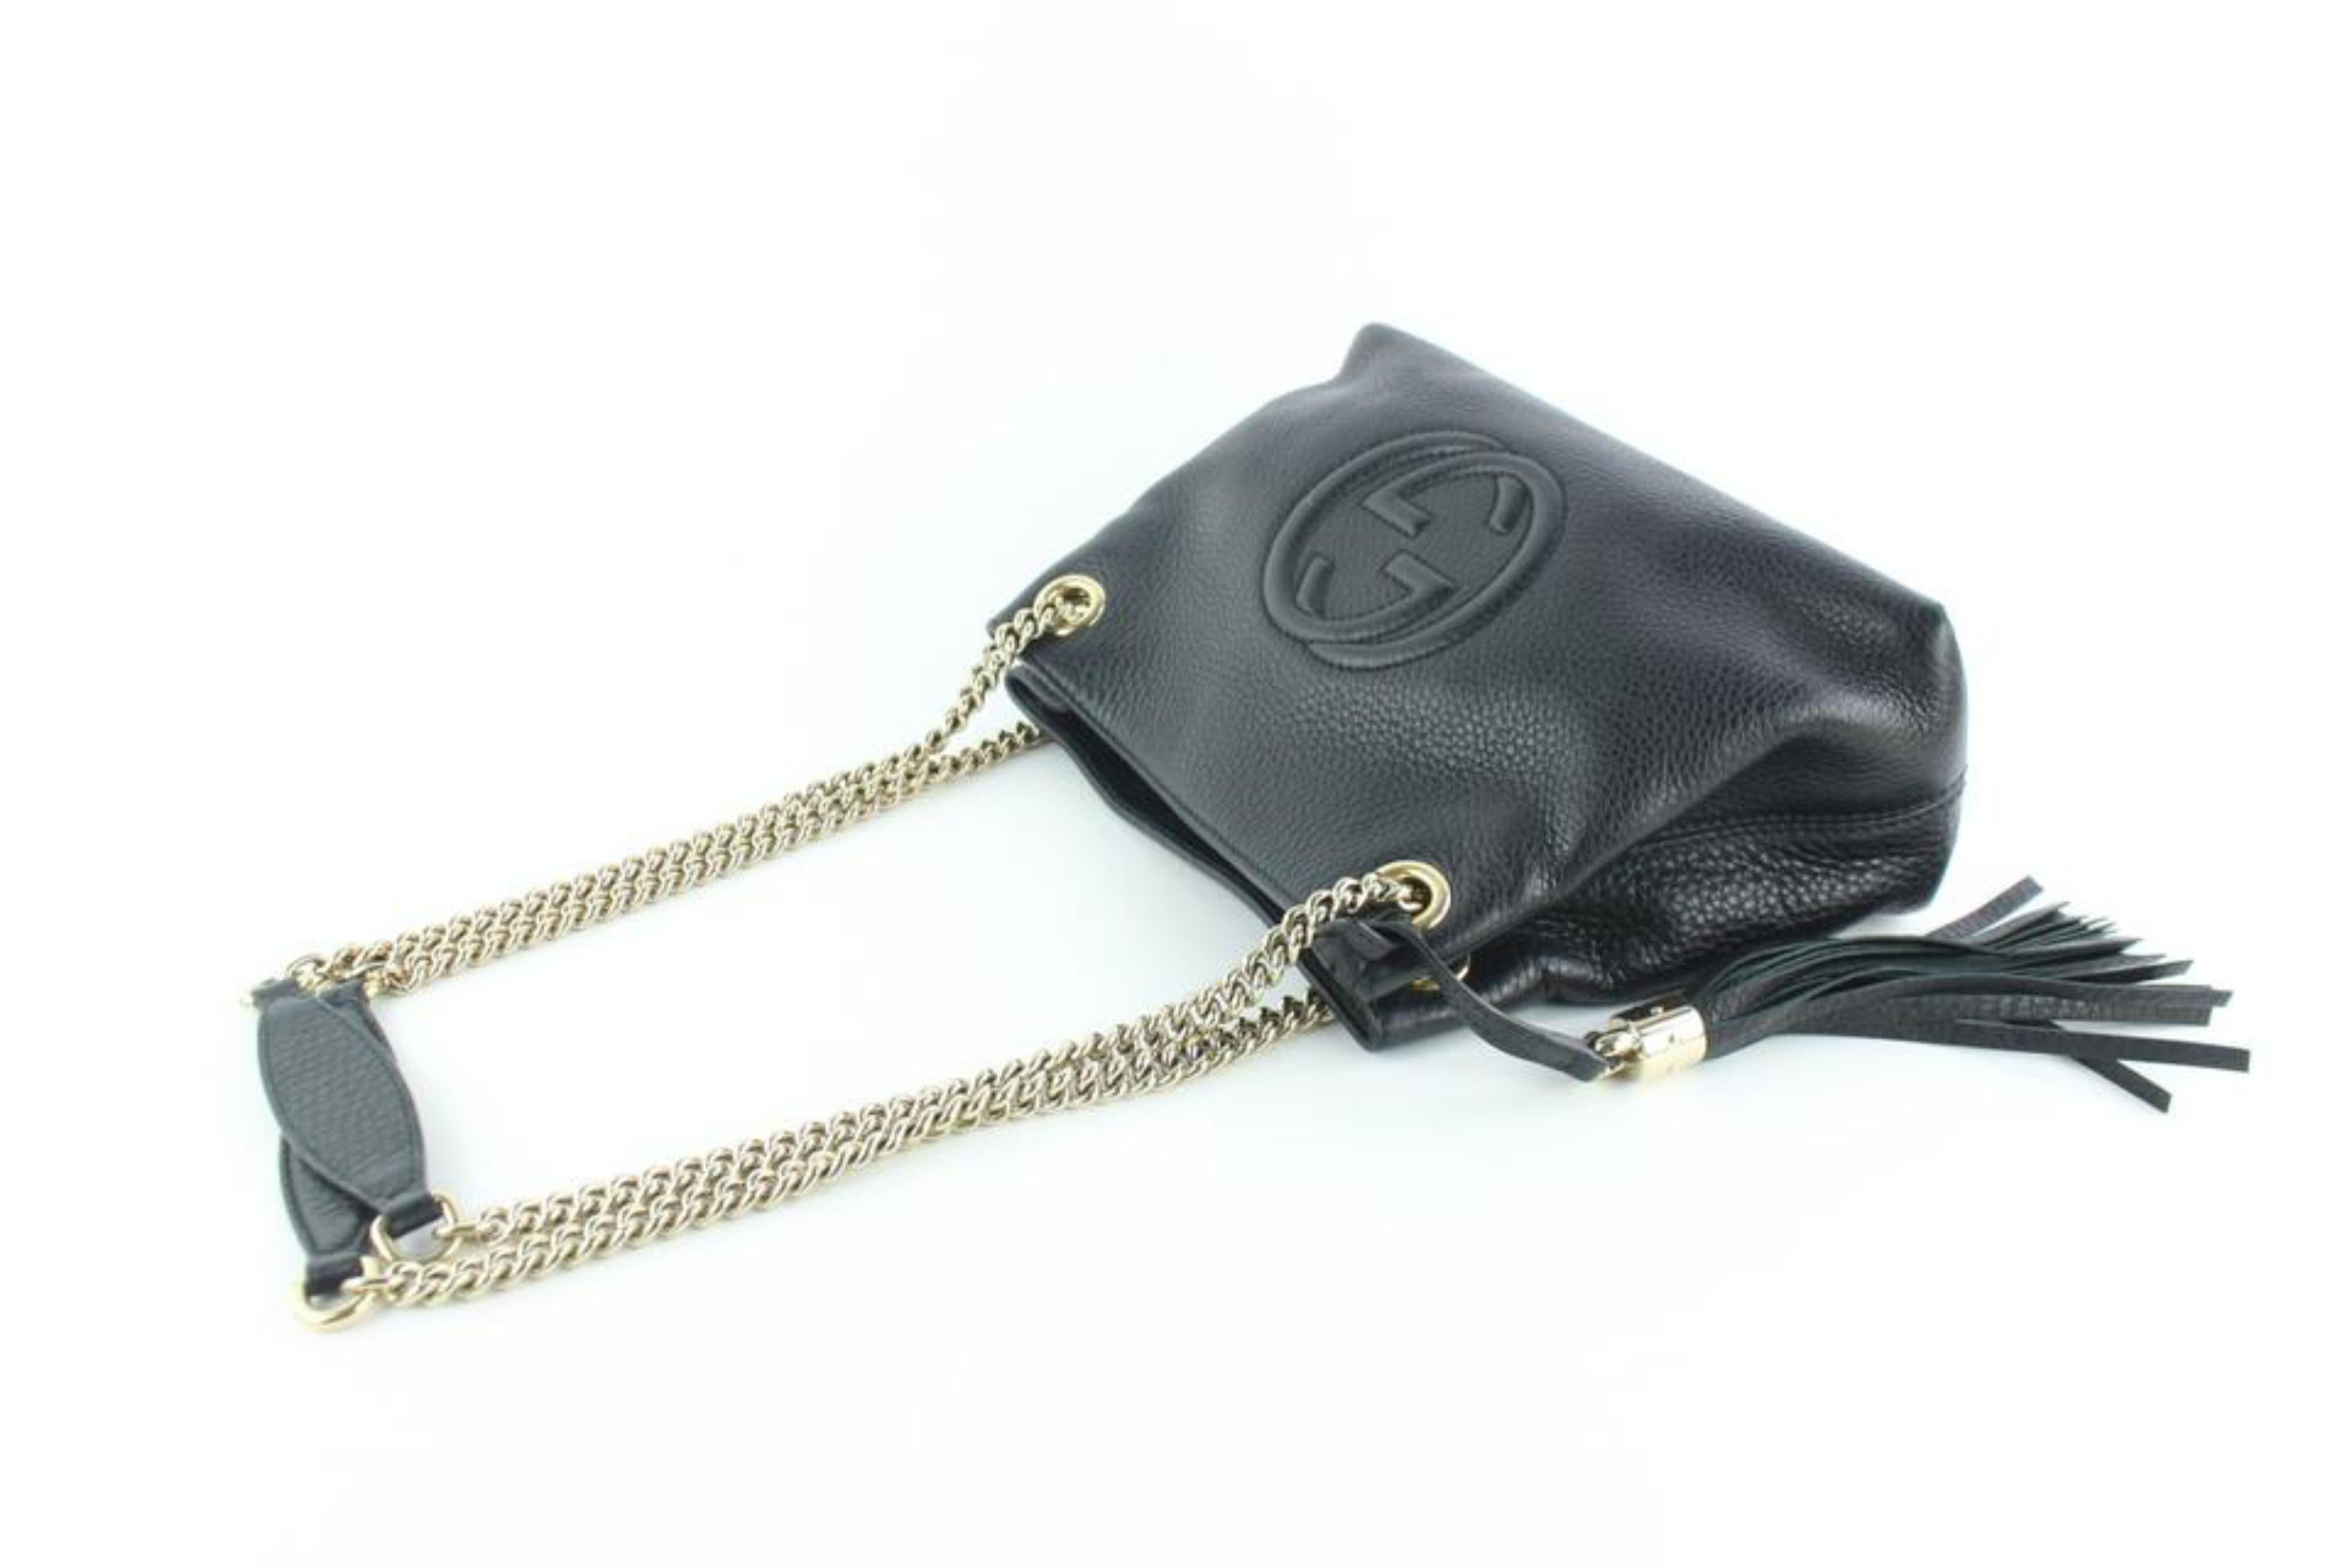 Gucci Soho (Ultra Rare) Chaint Tote 7gz1217 Black Leather Cross Body Bag For Sale 1